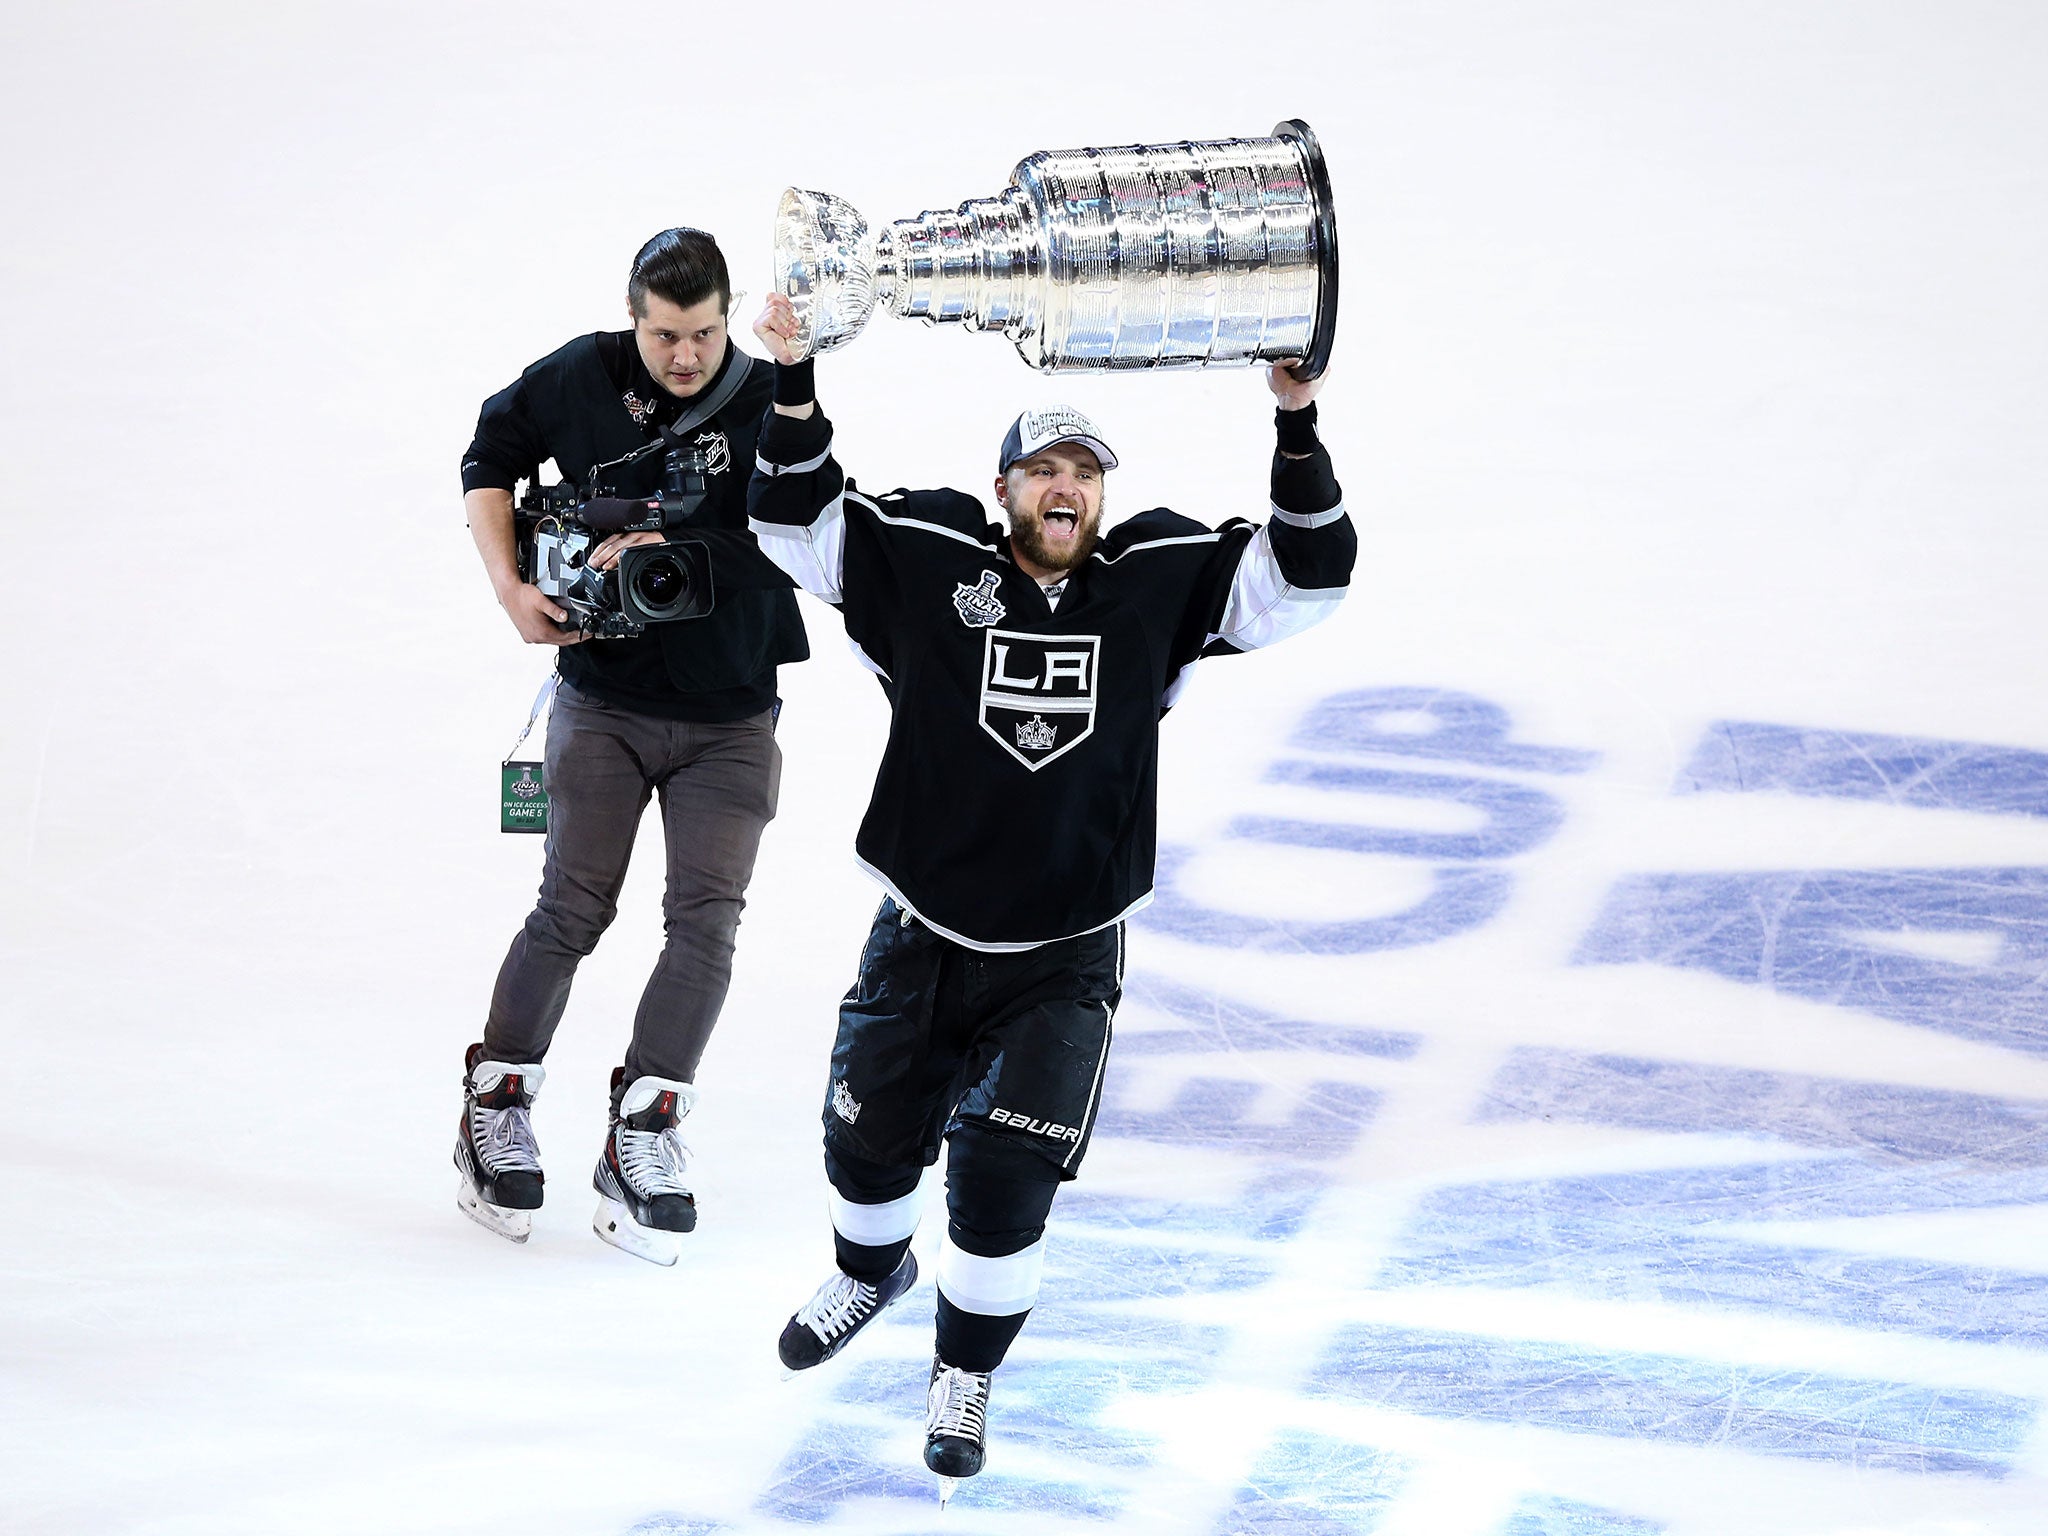 Marian Gaborik #12 of the Los Angeles Kings celebrates with the Stanley Cup after the Kings 3-2 double overtime victory against the New York Rangers